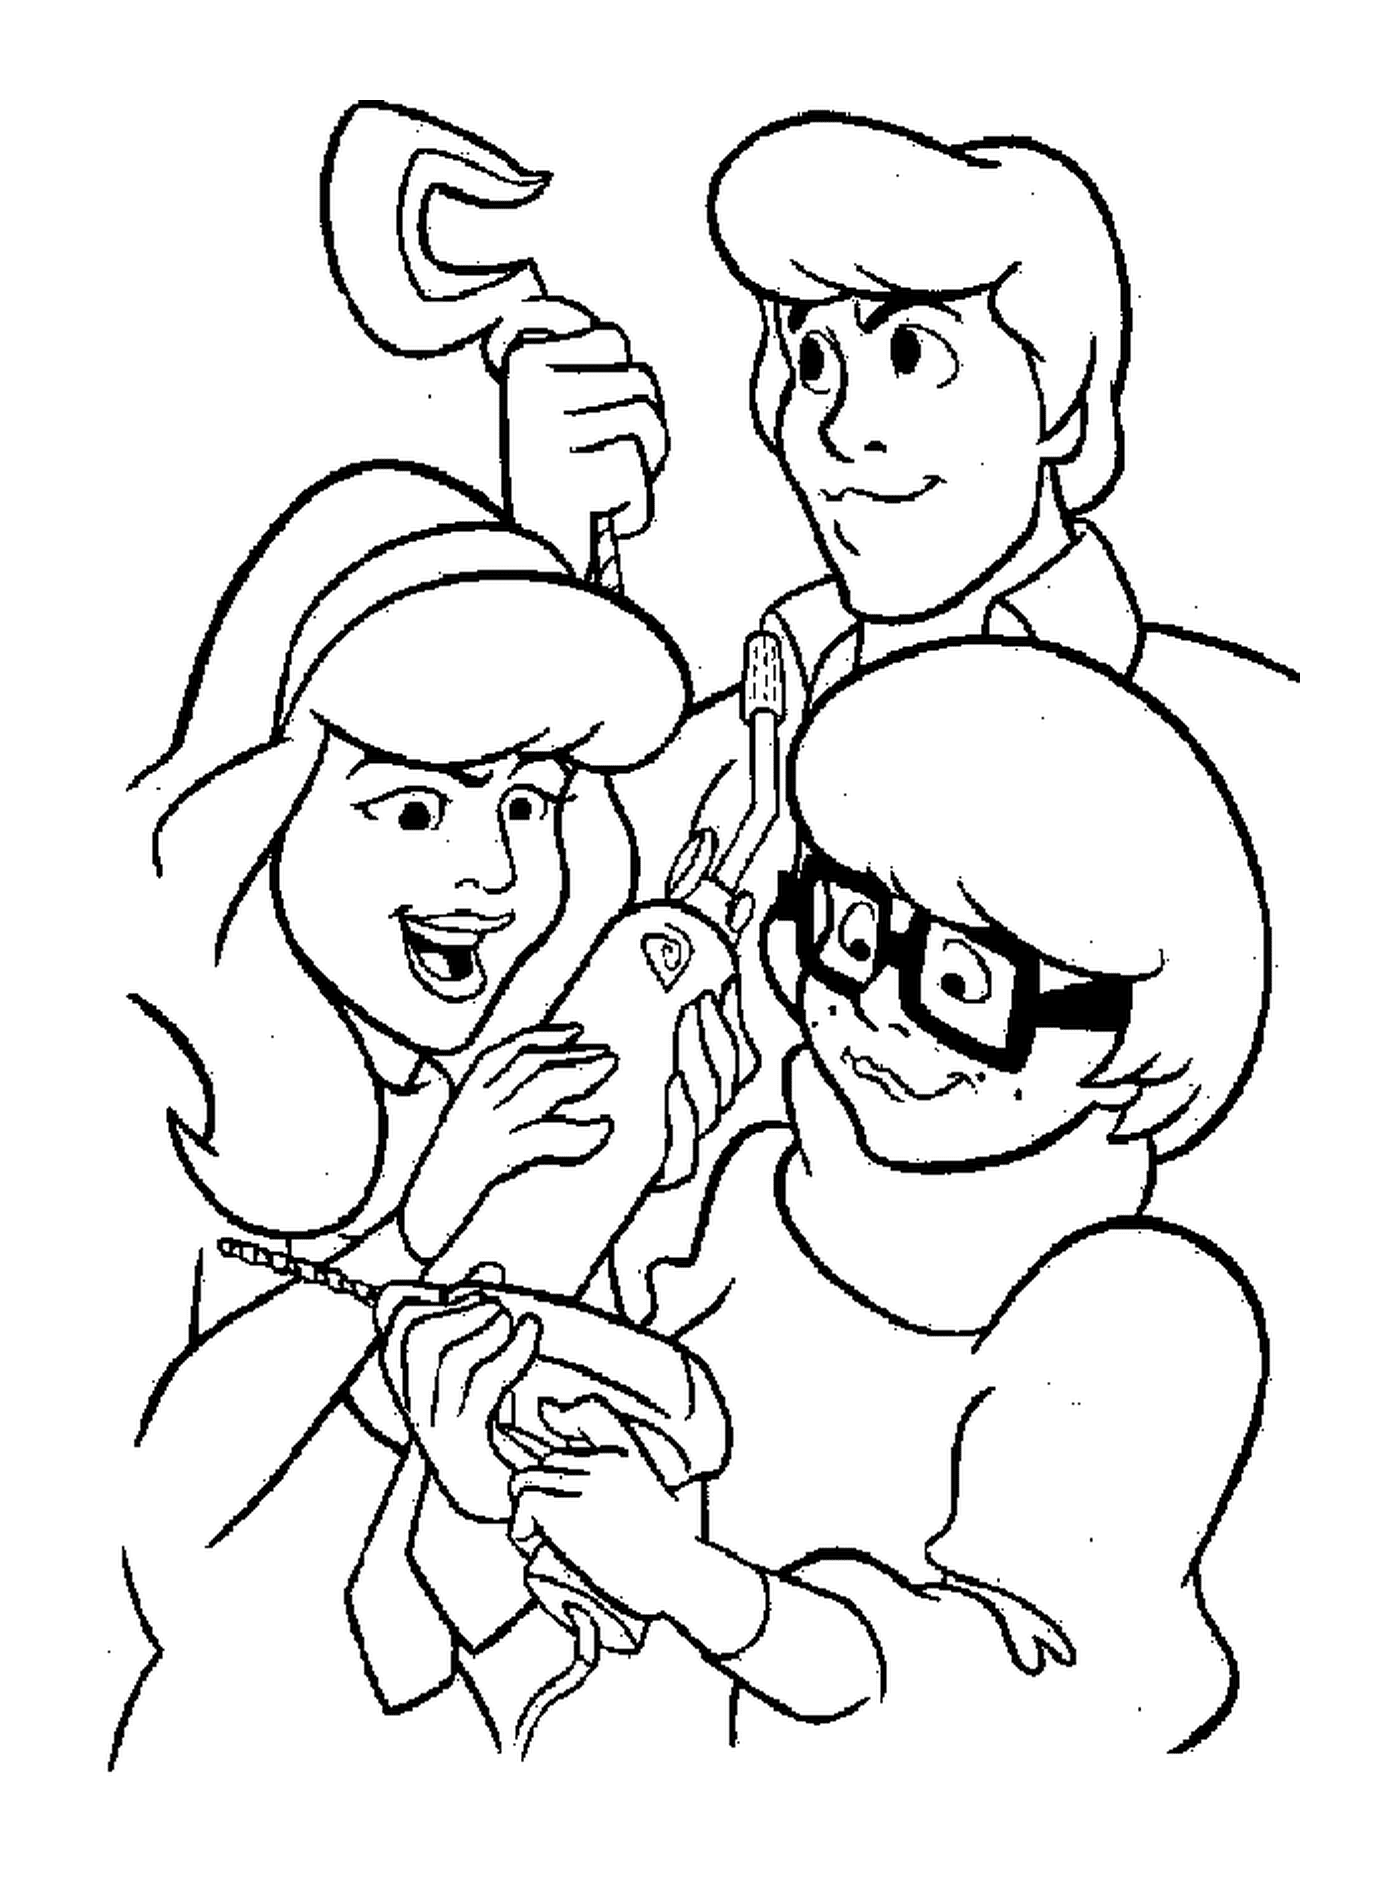  The Scooby-Doo gang 